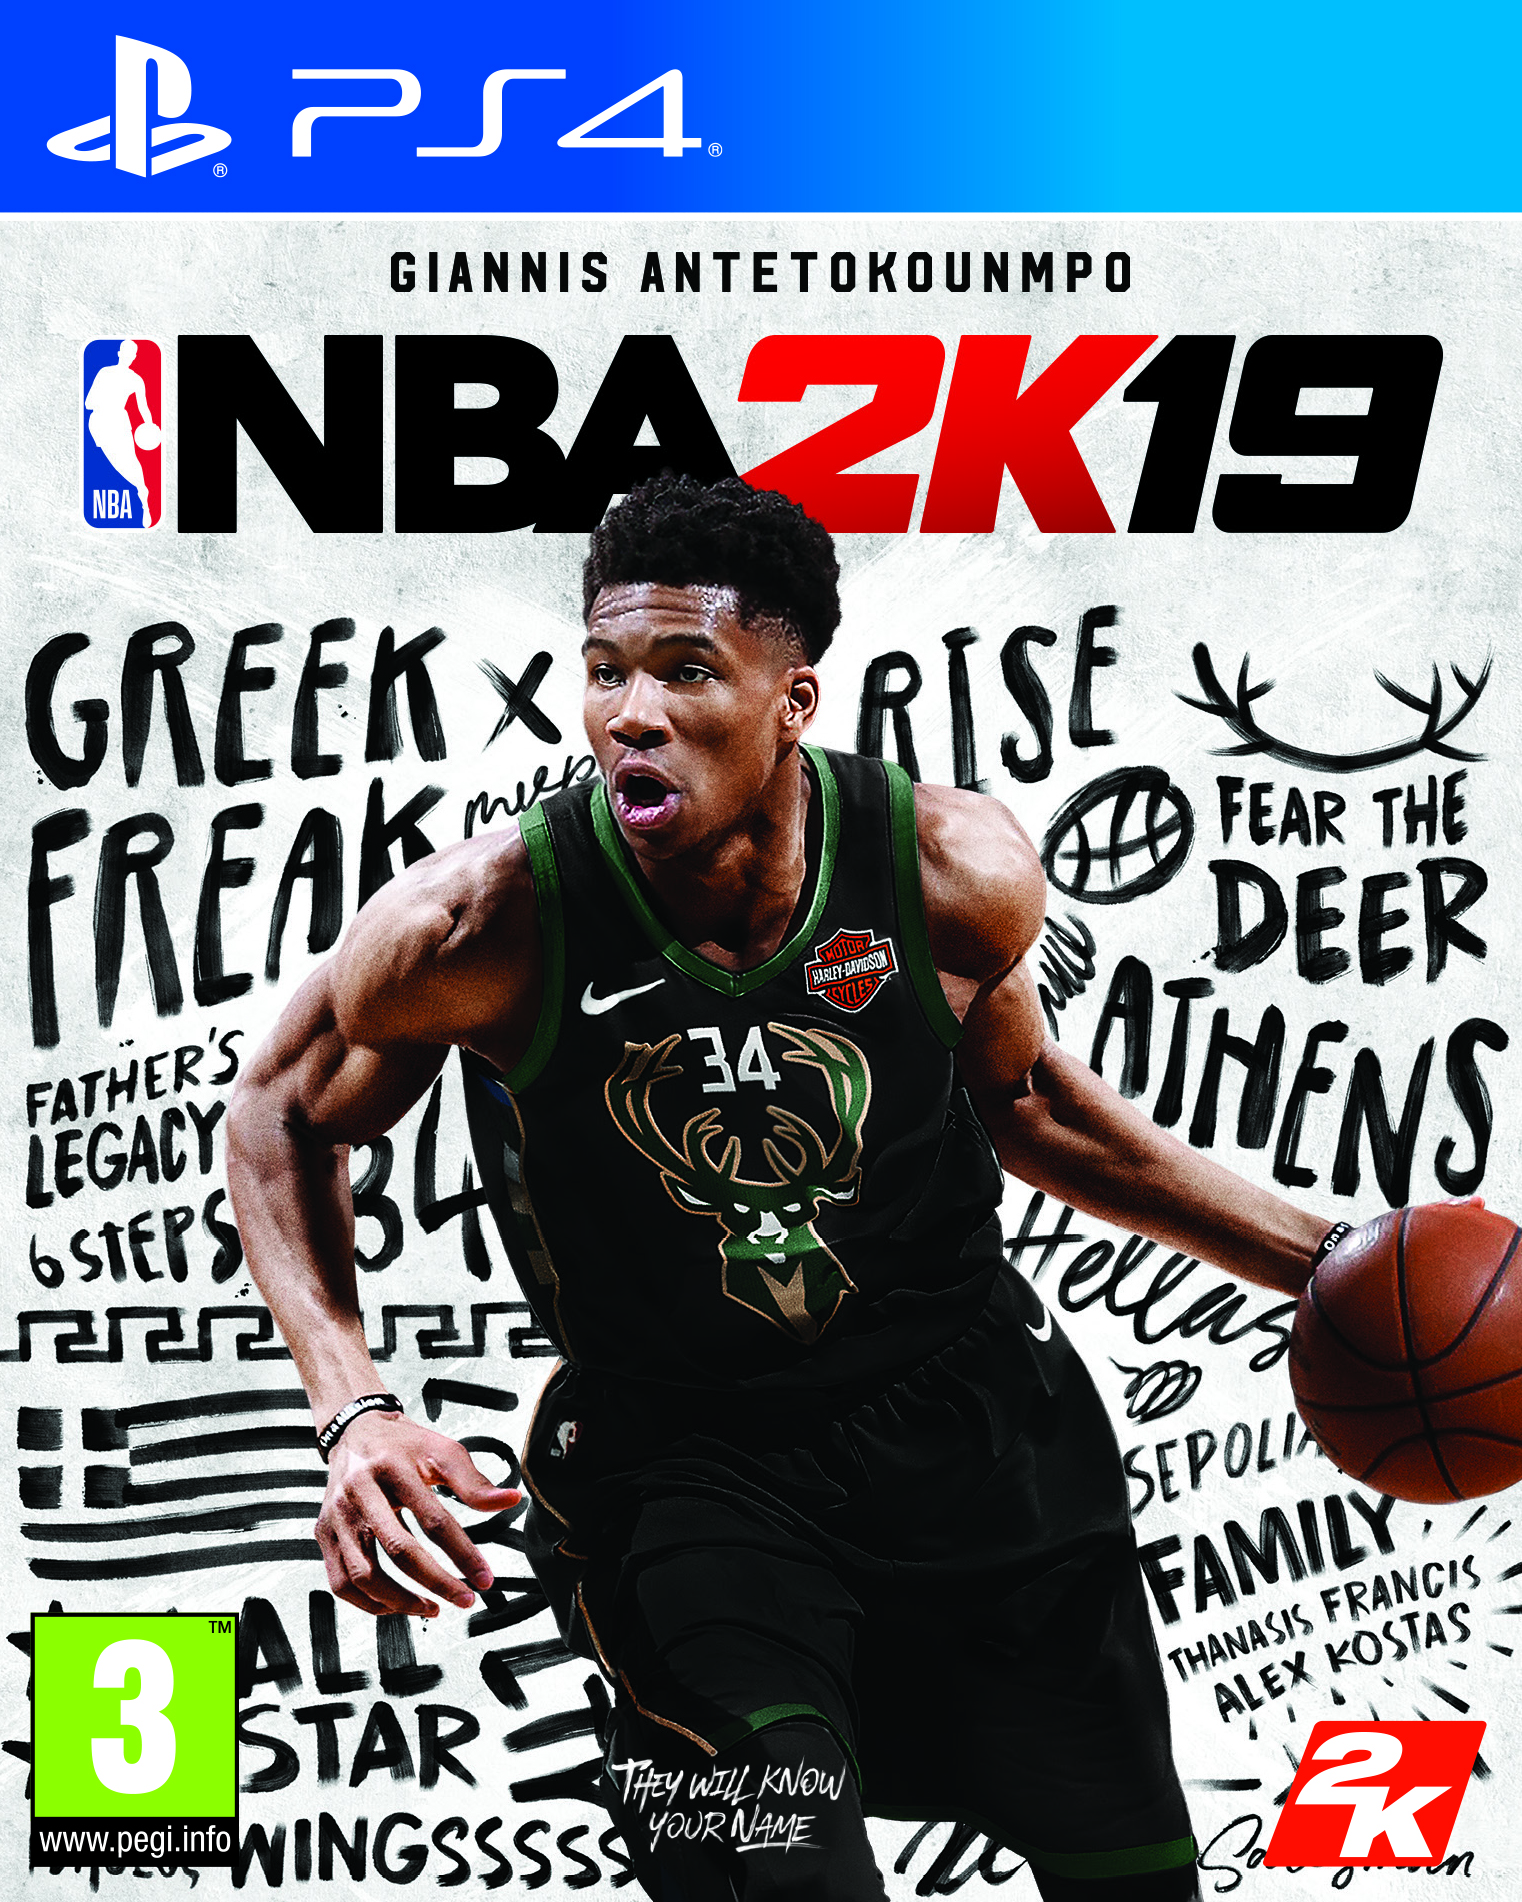 You are currently viewing ביקורת משחק – NBA 2k19 / תומר שנאן